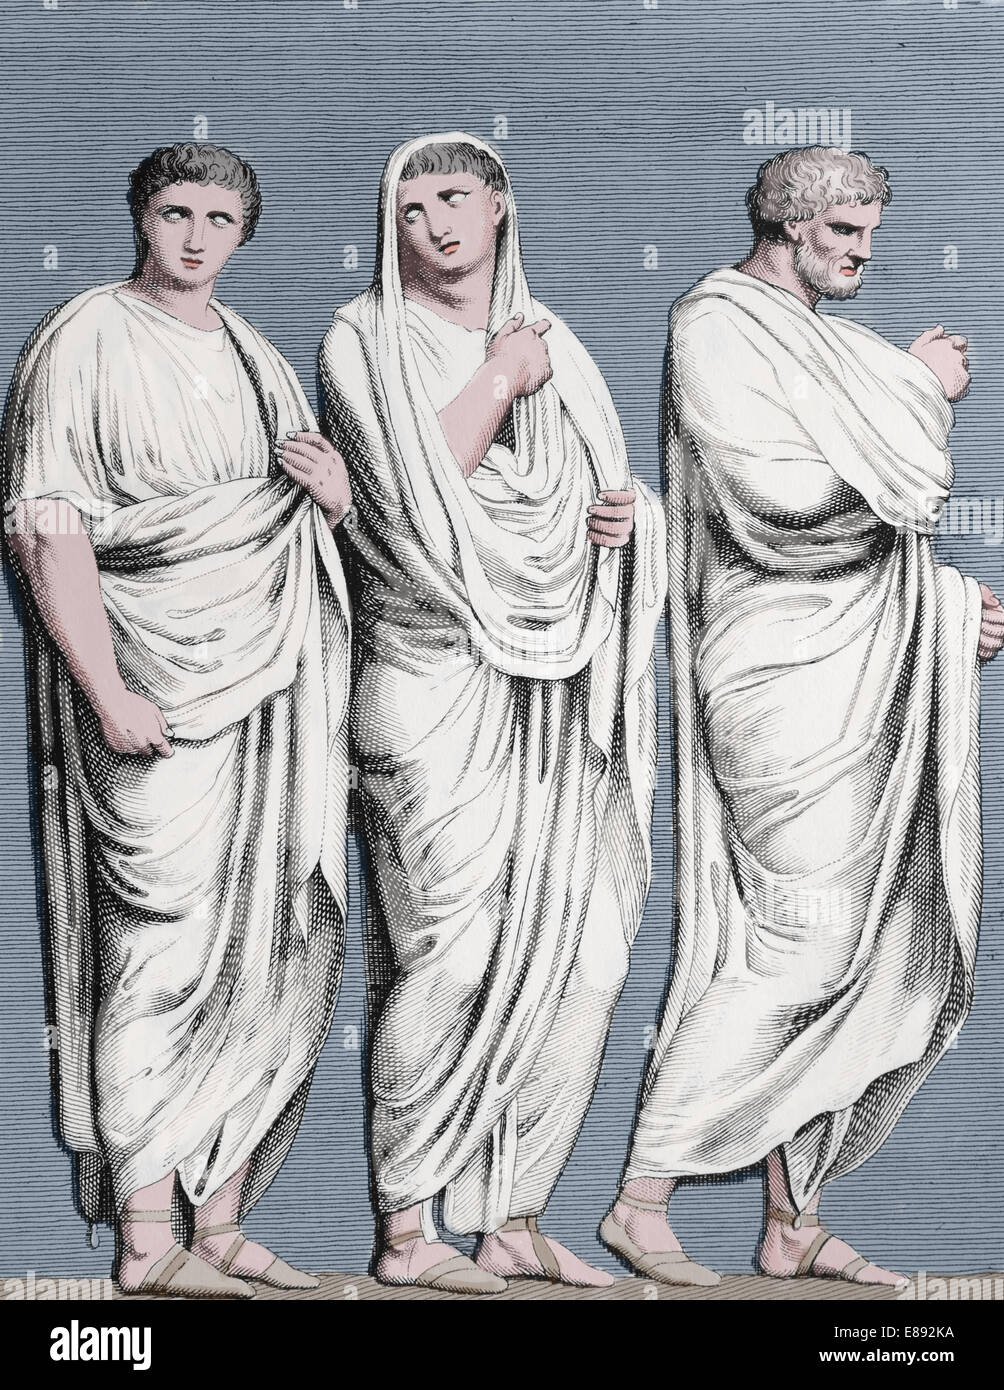 Antiquity. Ancient Rome. Roman togas. Engraving, 19th century. Later colouration. Stock Photo